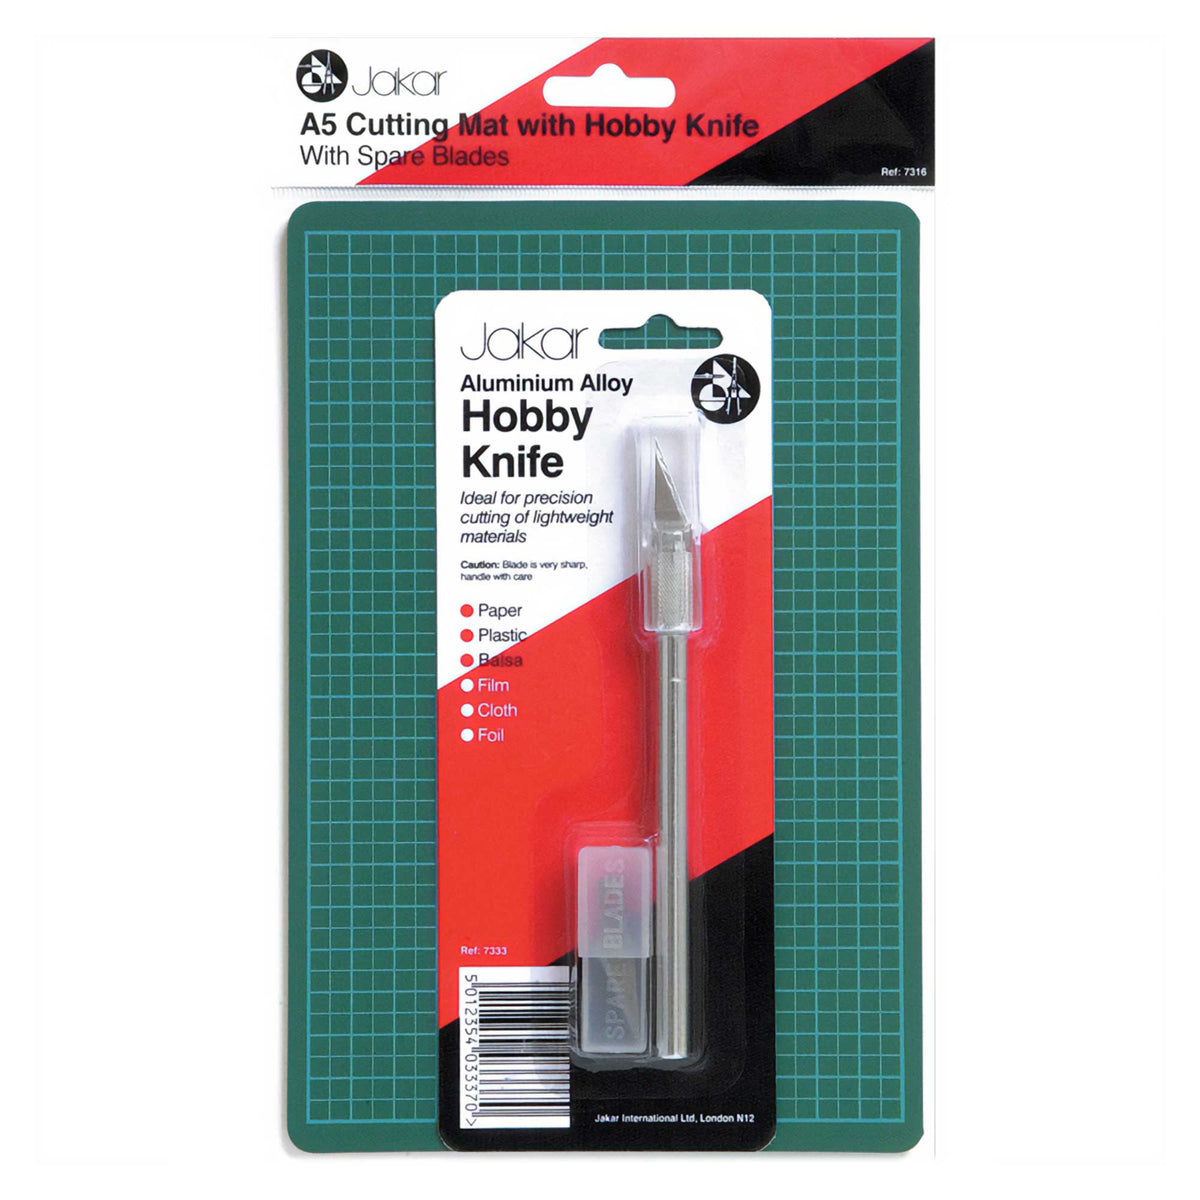 Jakar A5 Cutting Mat with Hobby Knife and 5-pack of Blades